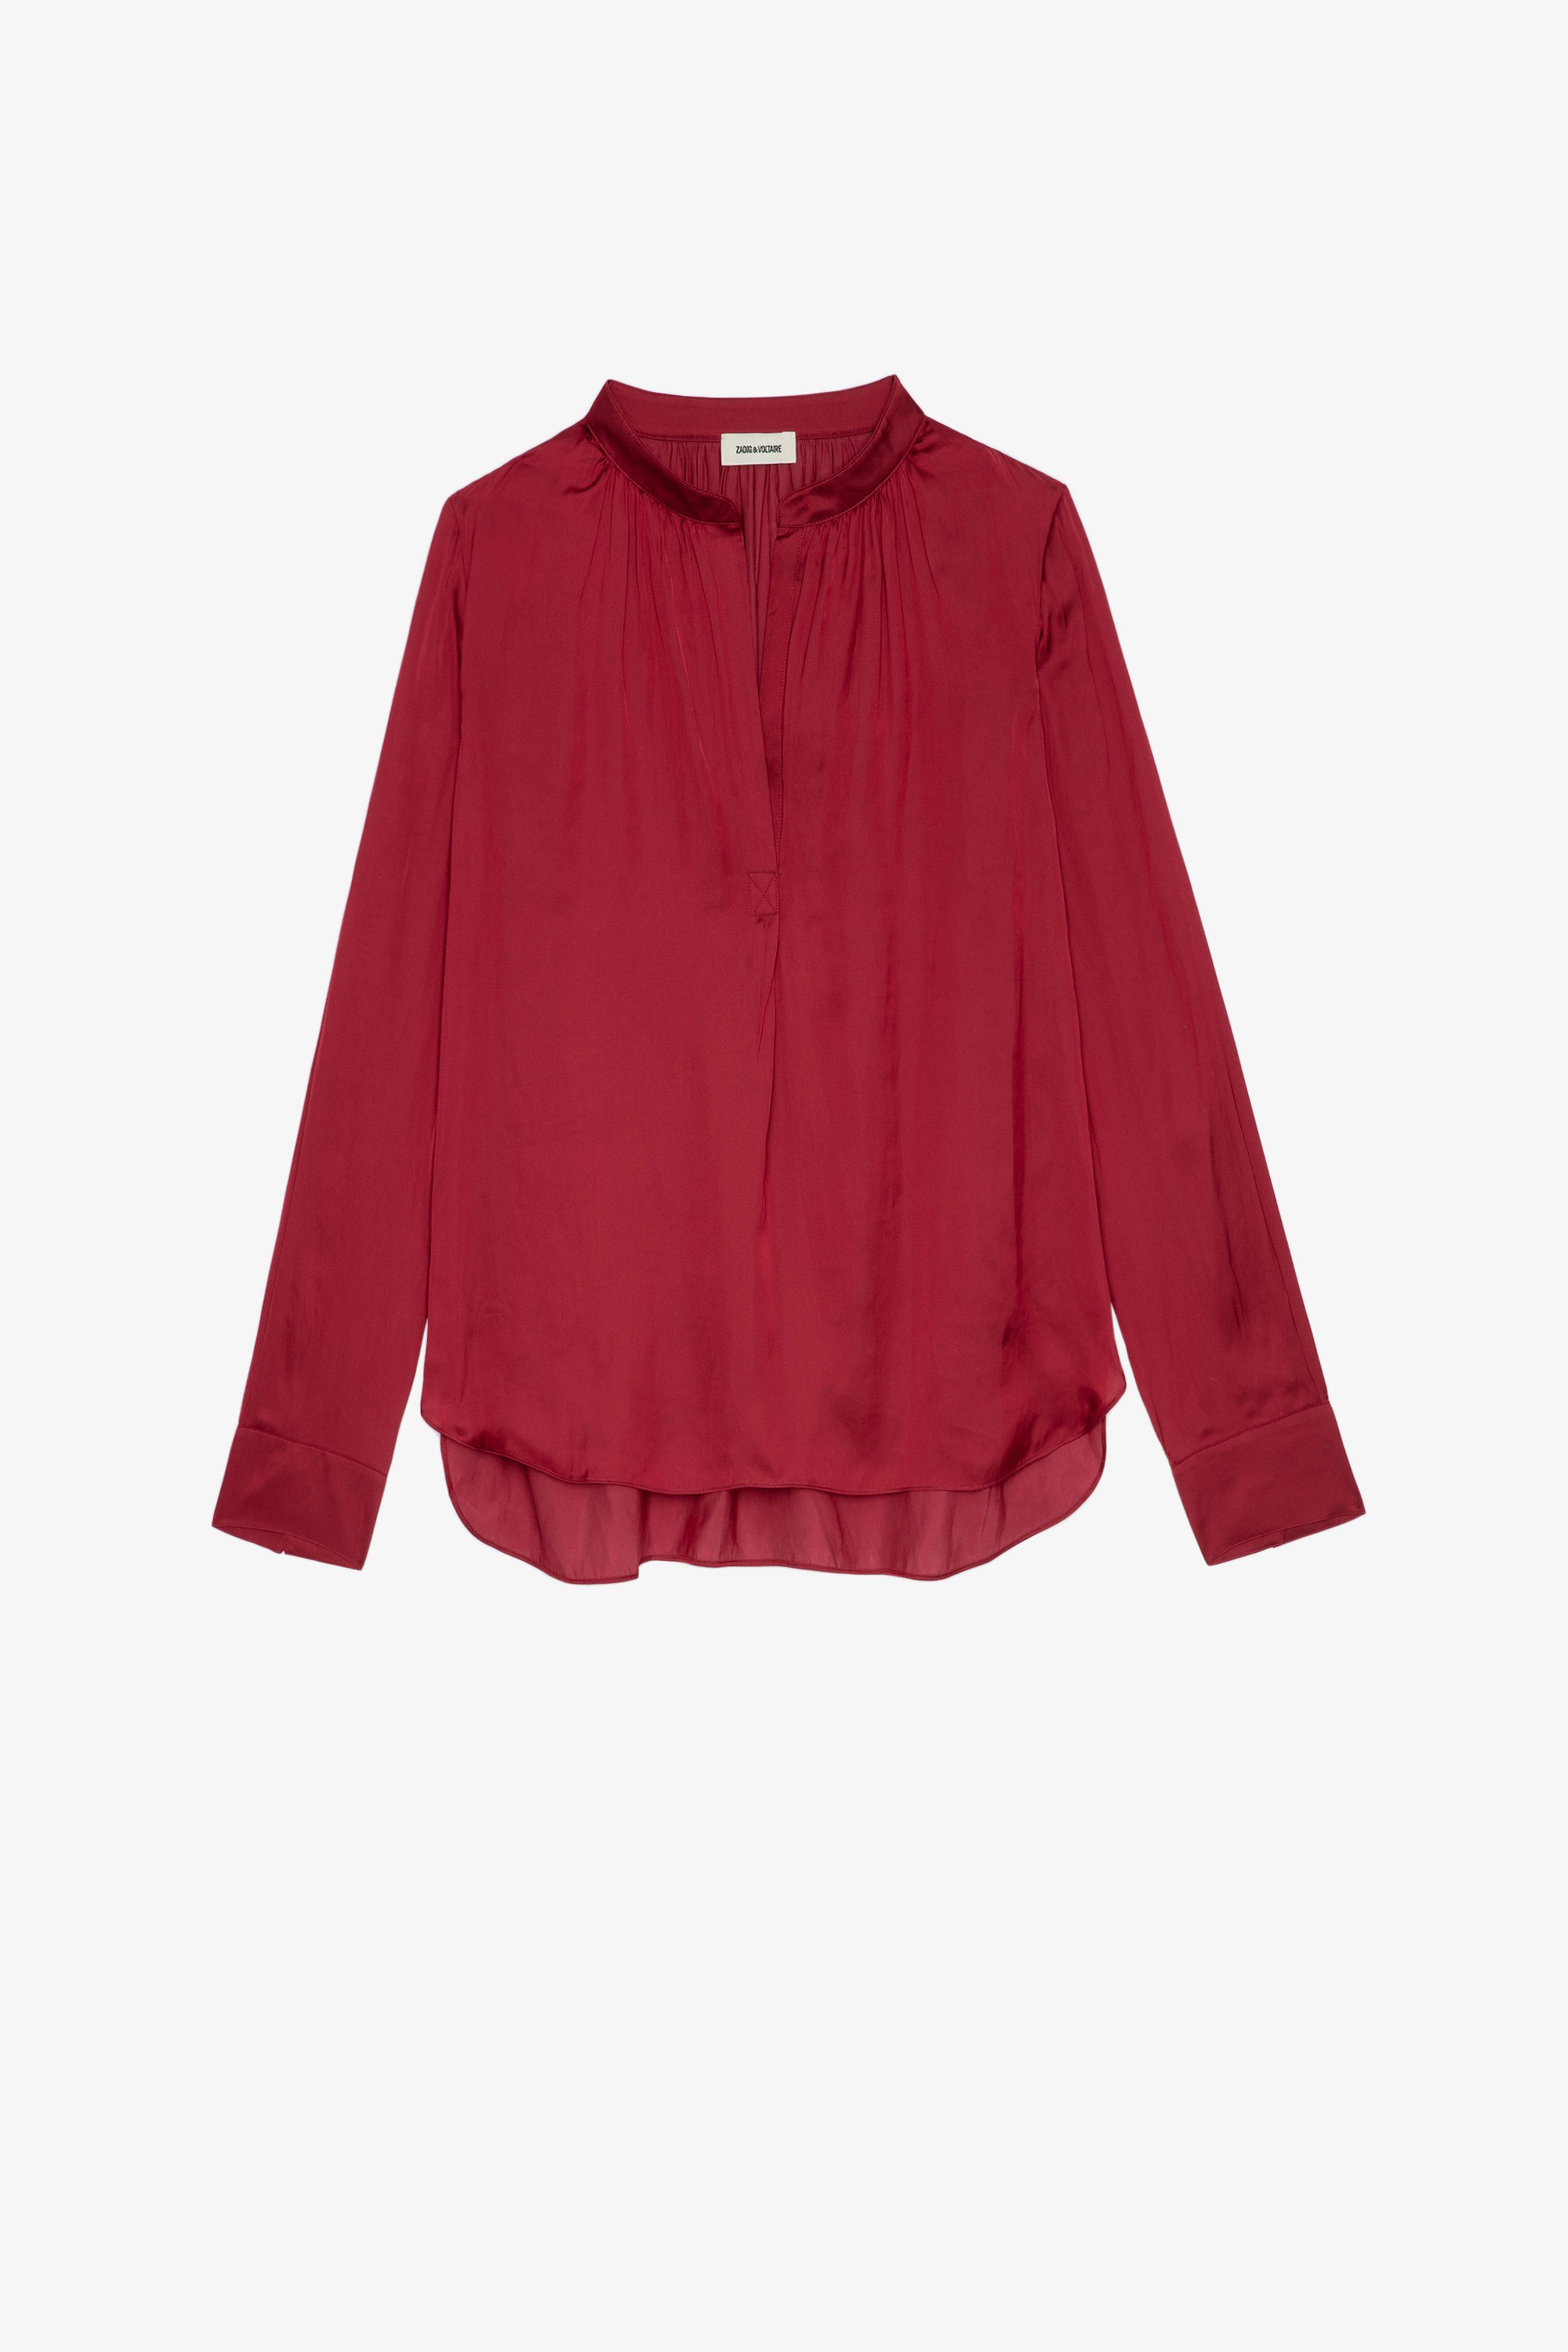 Tink サテンシャツ Women’s red satiny blouse with open collar